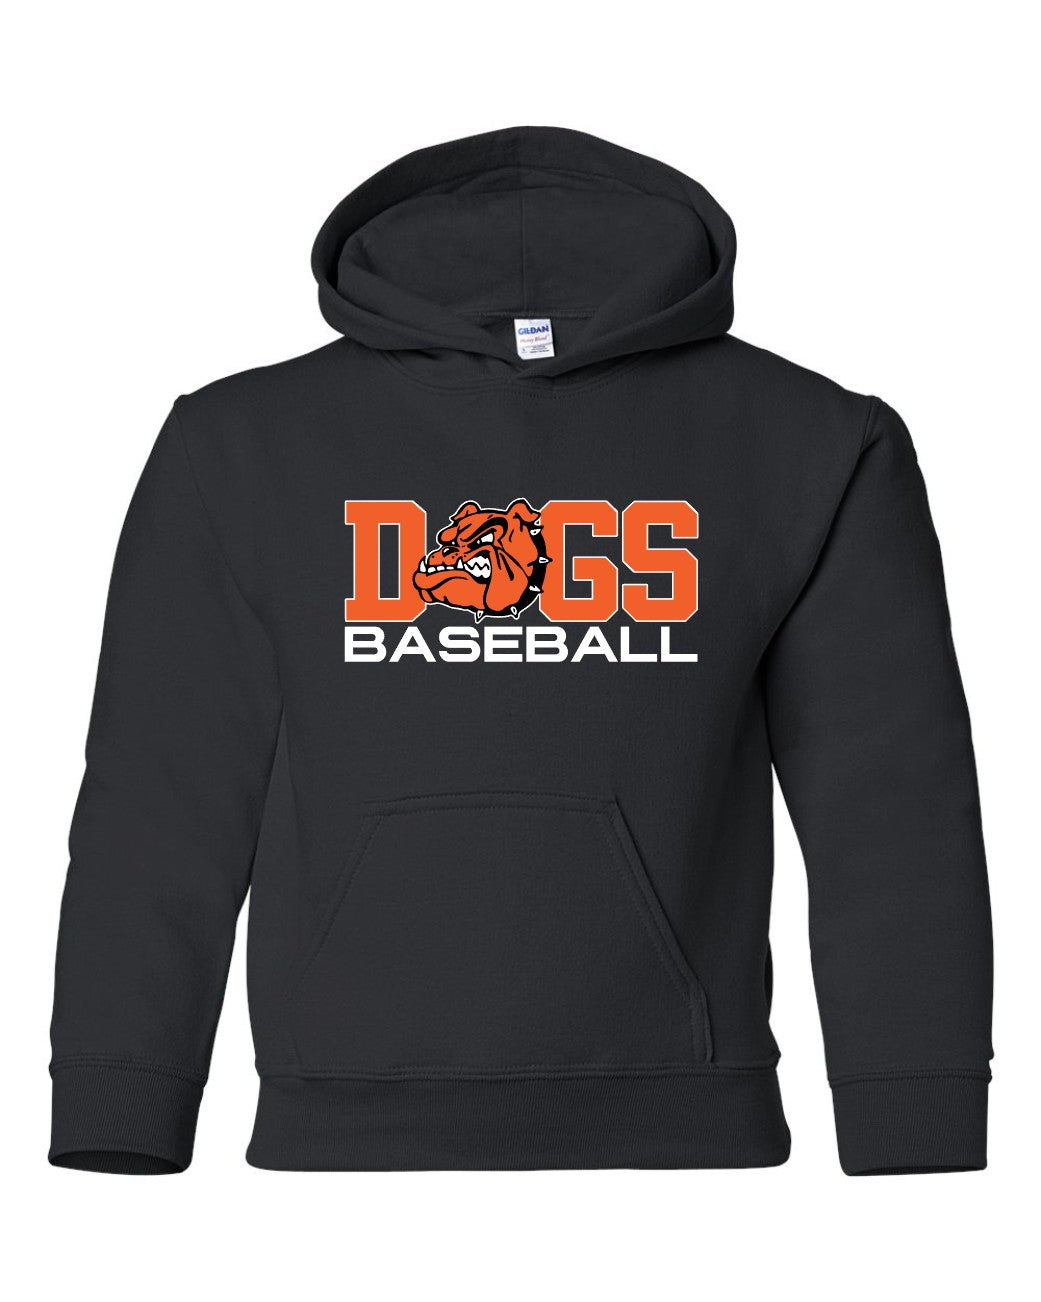 Brighton Baseball 8U Player Hoodie (RECOMMENDED)